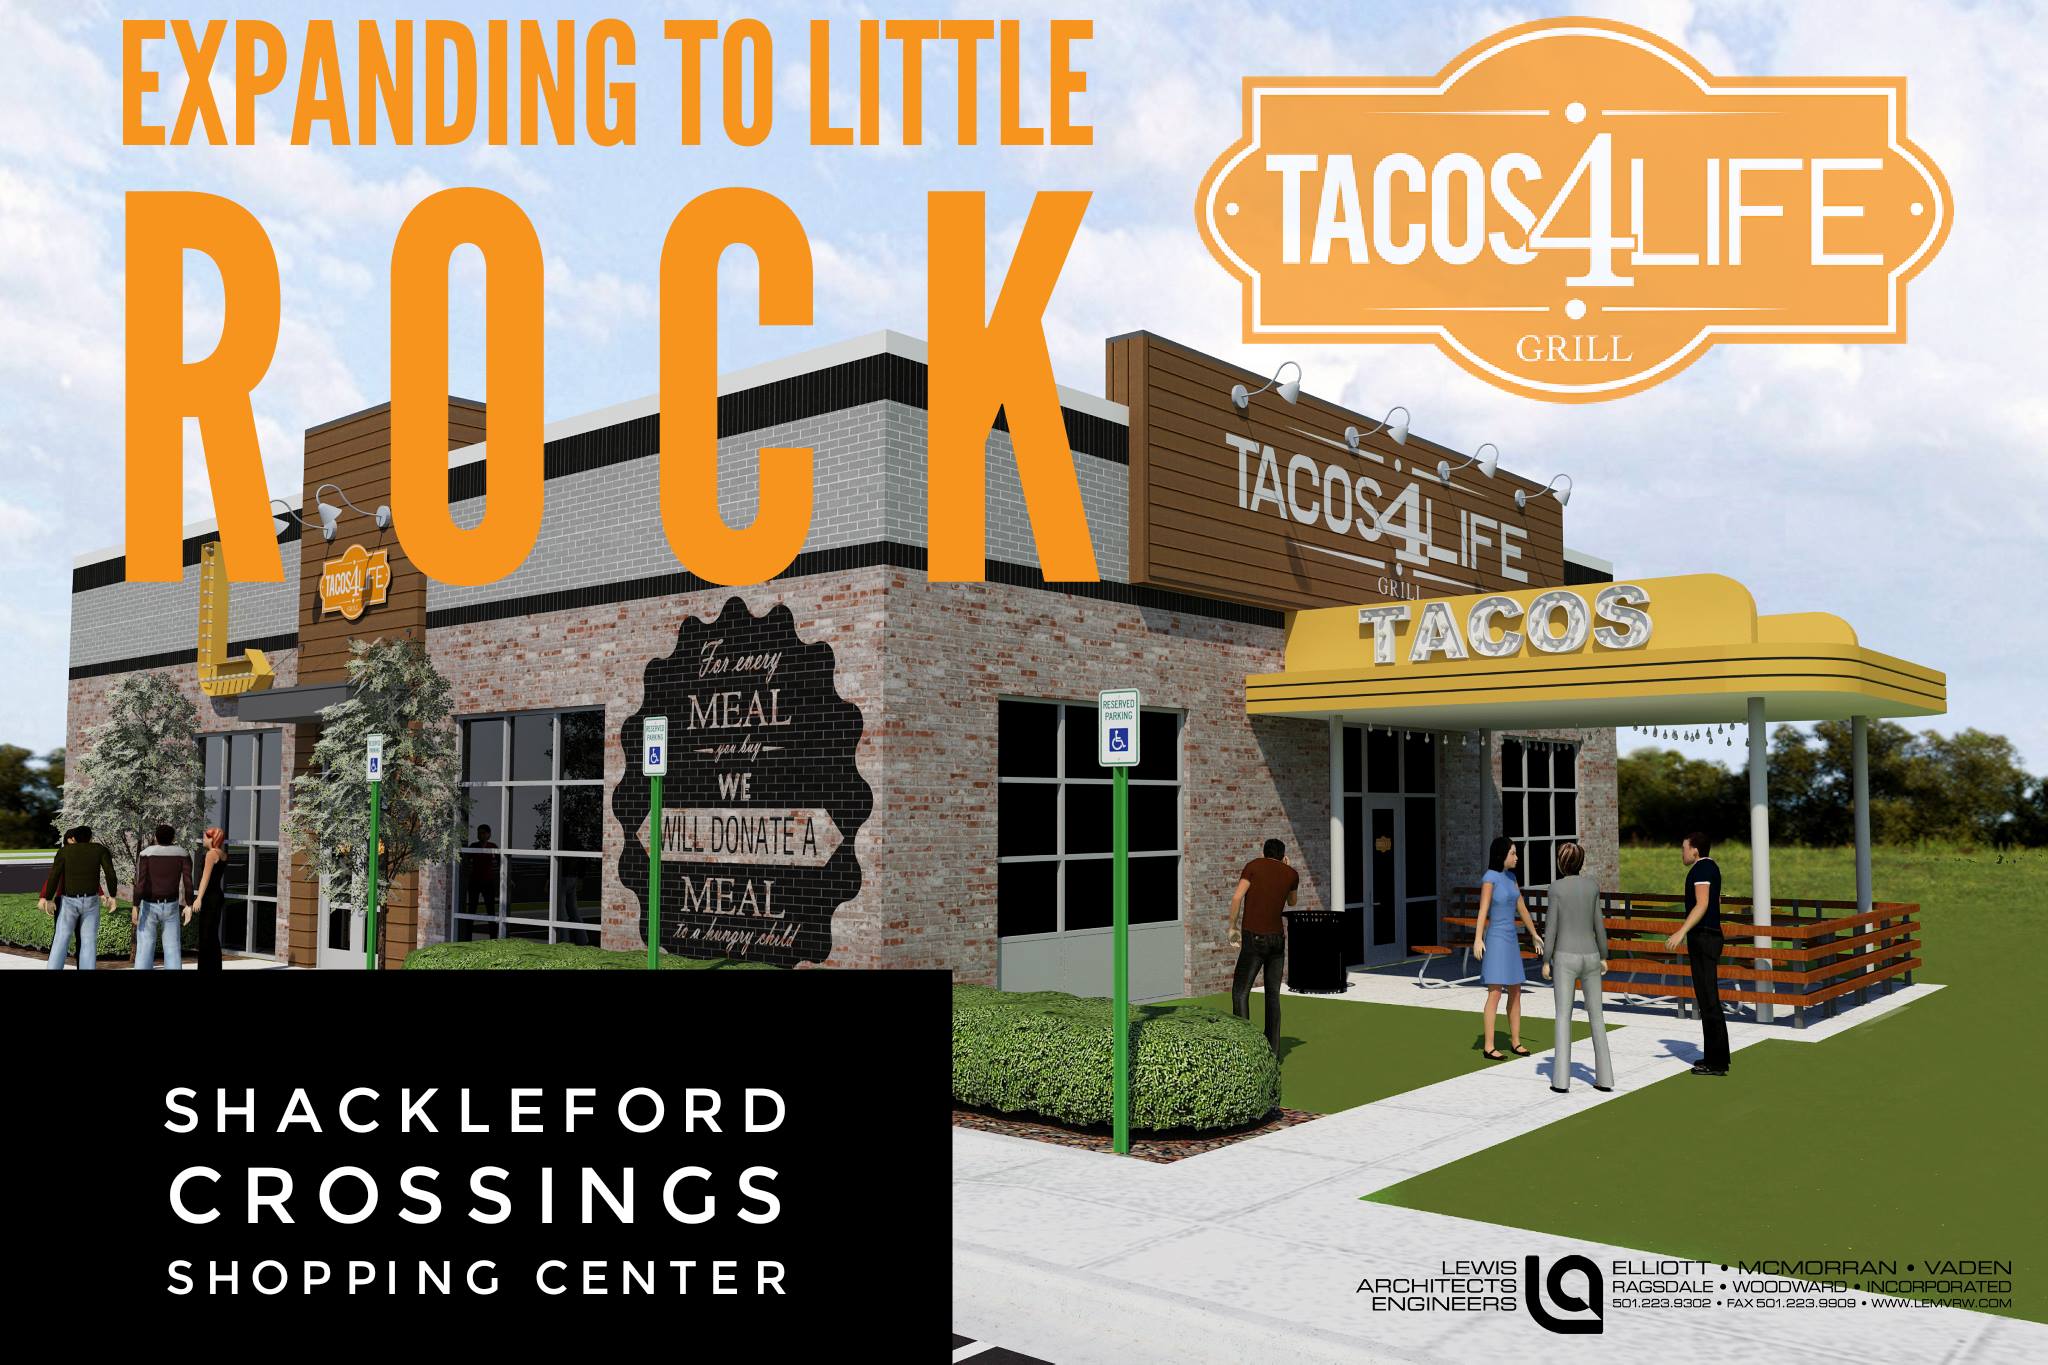 Tacos 4 Life Comes To Little Rock | Shackleford Crossings Shopping Center Image